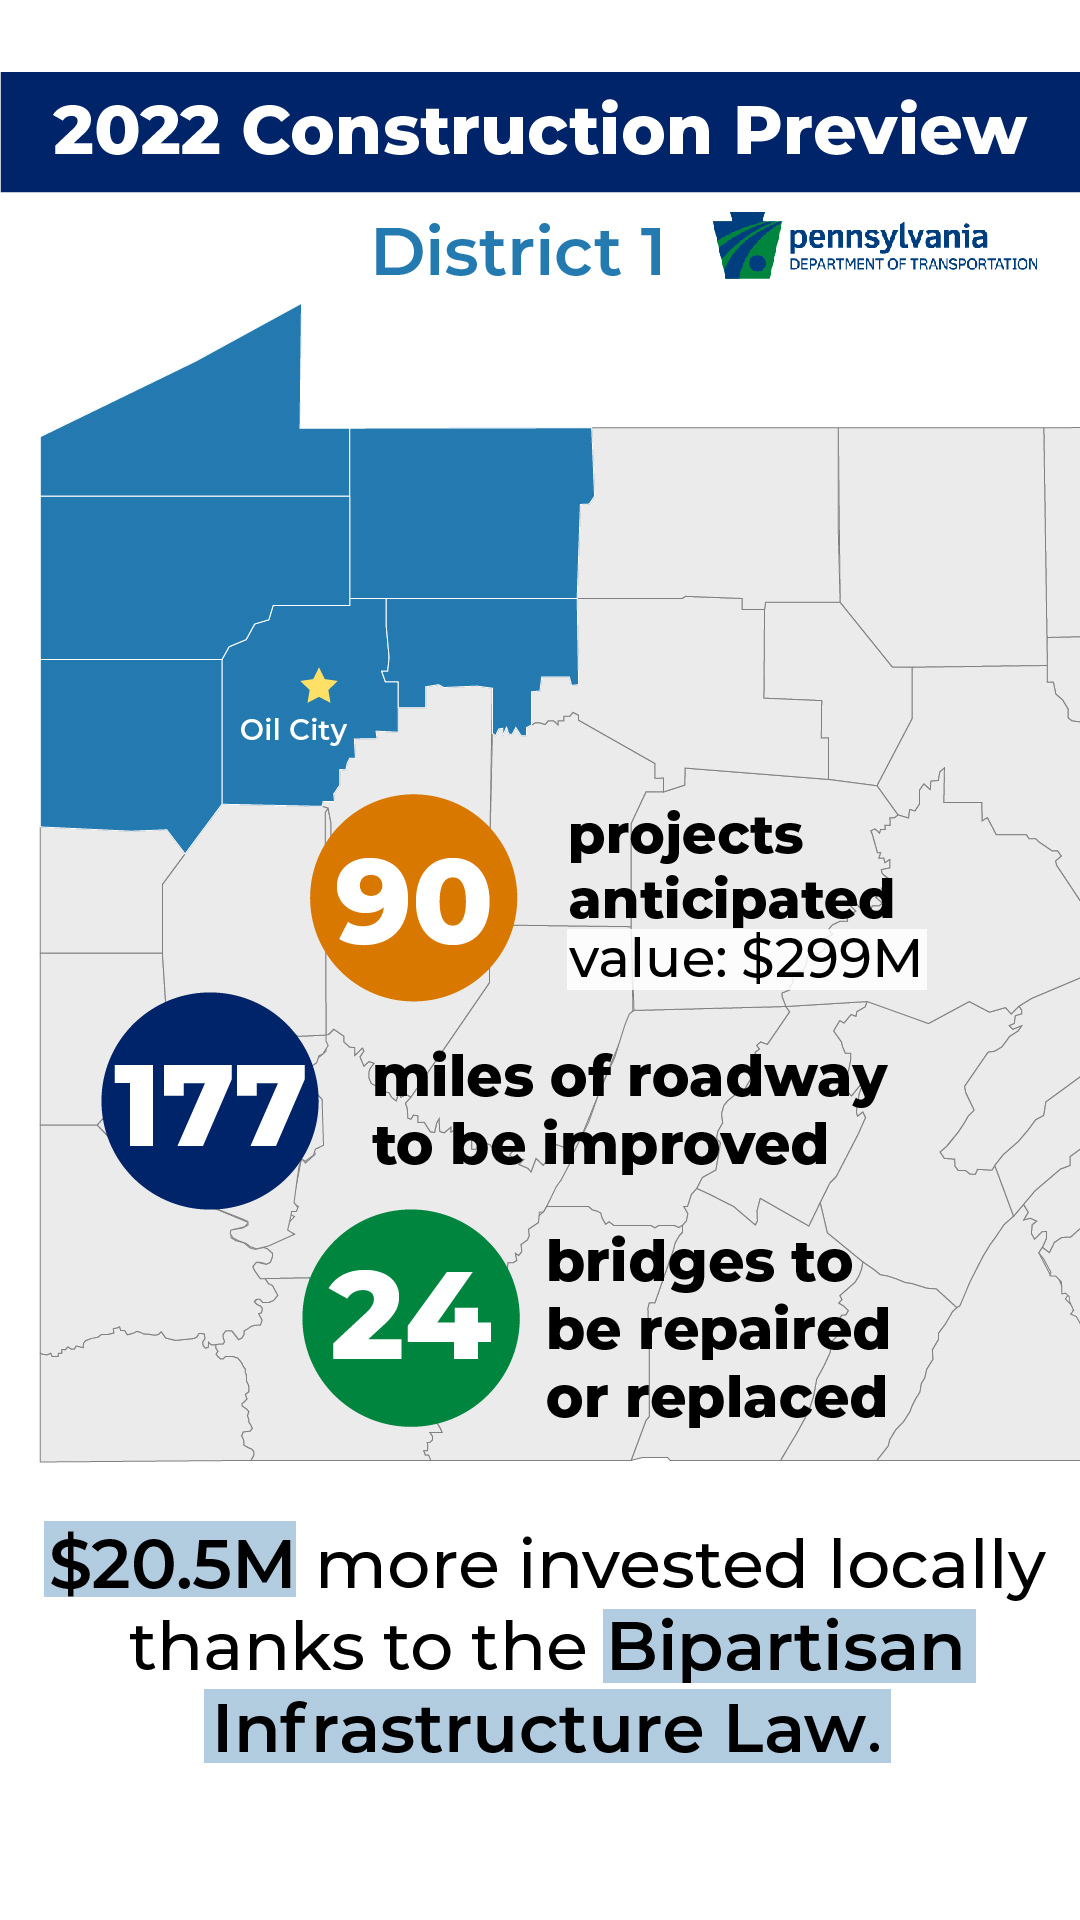 In PennDOT's District 1, 90 projects are anticipated for 2022. Approximately 177 miles of roadway will be improved, and 24 bridges will be repaired or replaced. Thanks to the Bipartisan Infrastructure Law, $20.5 million more will be invested locally.